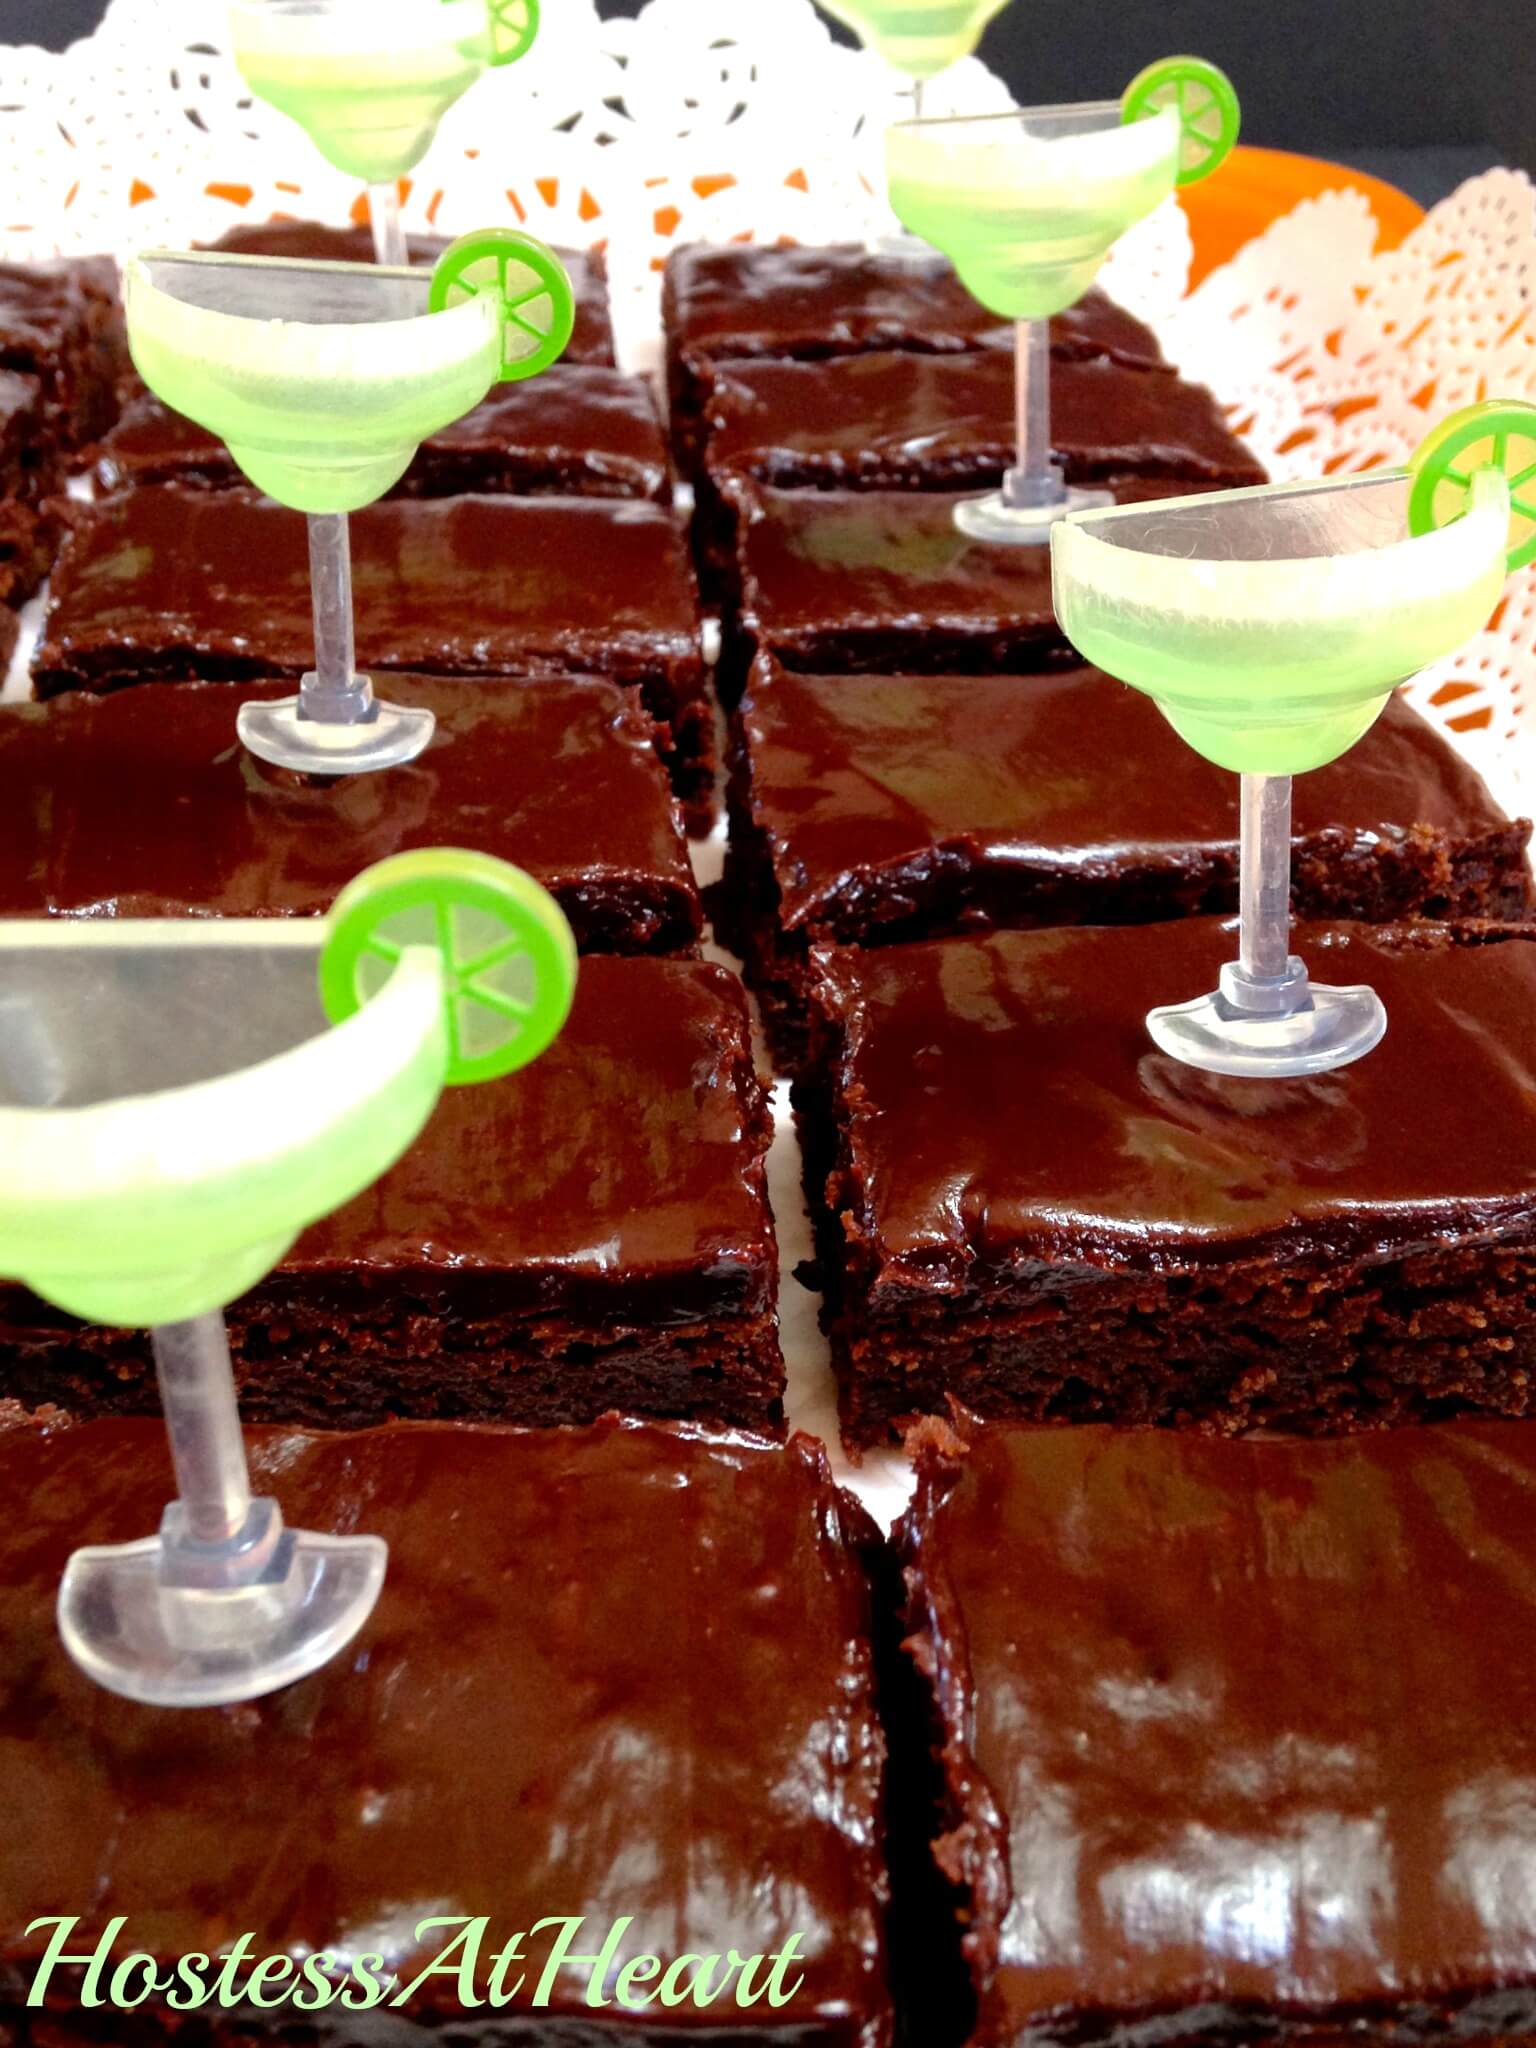 Sliced chocolate brownies frosted in chocolate frosting. Plastic margarita glasses decorate the brownies.